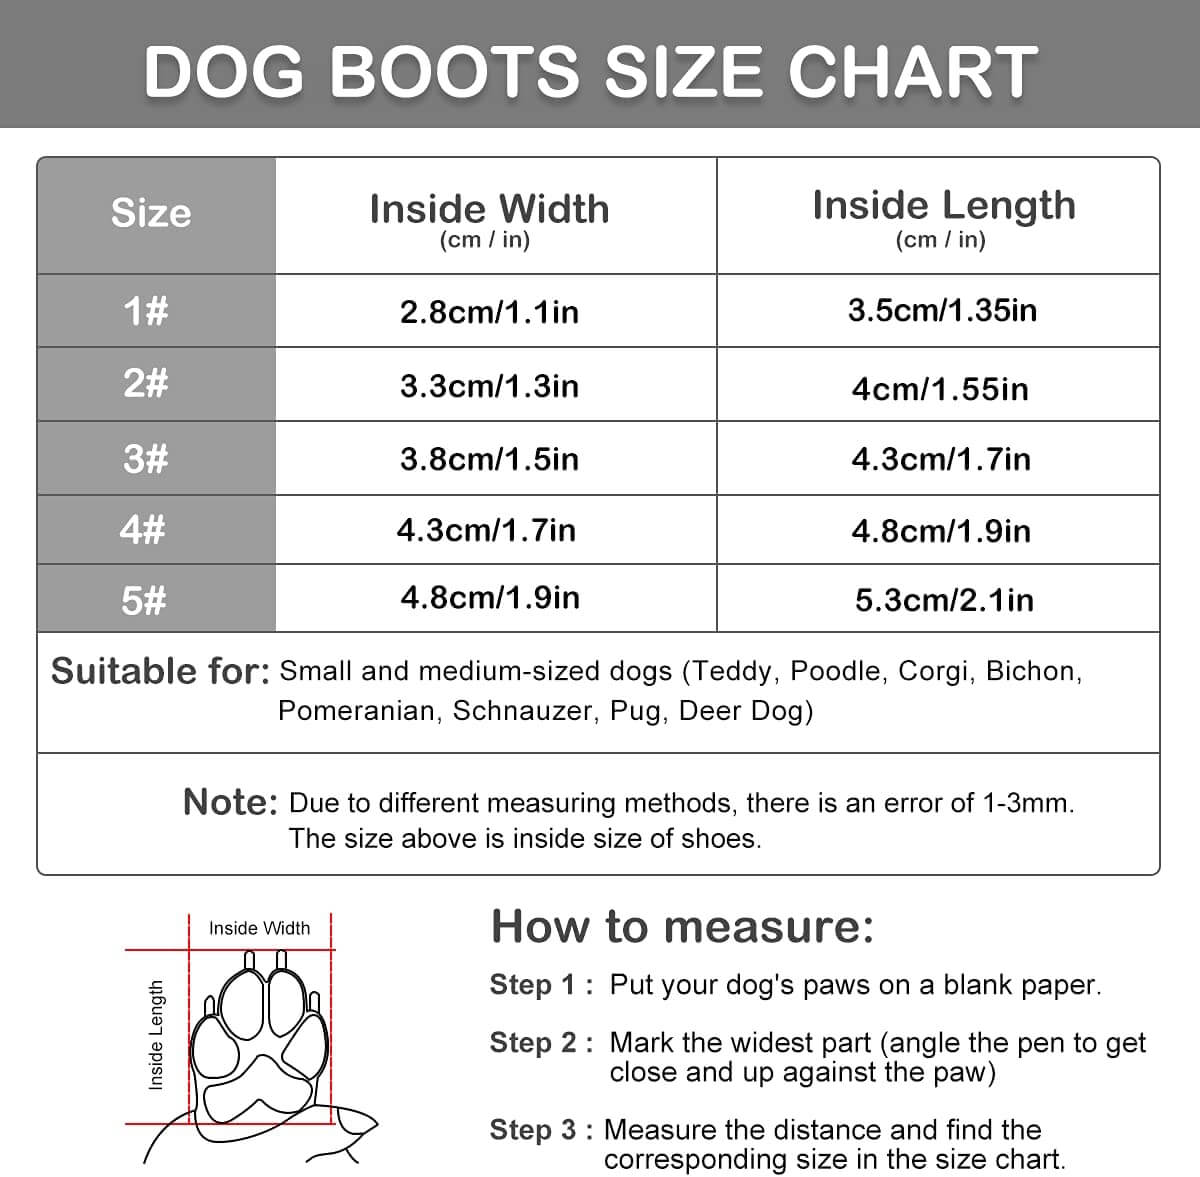 KUTKUT Dog Boots for Hot Pavement Hardwood Floor, Breathable Dog Shoes for Small Medium Dogs with Reflective & Adjustable Strap Zipper, Anti-Slip Paw Protection Dog Booties Red - kutkutstyle